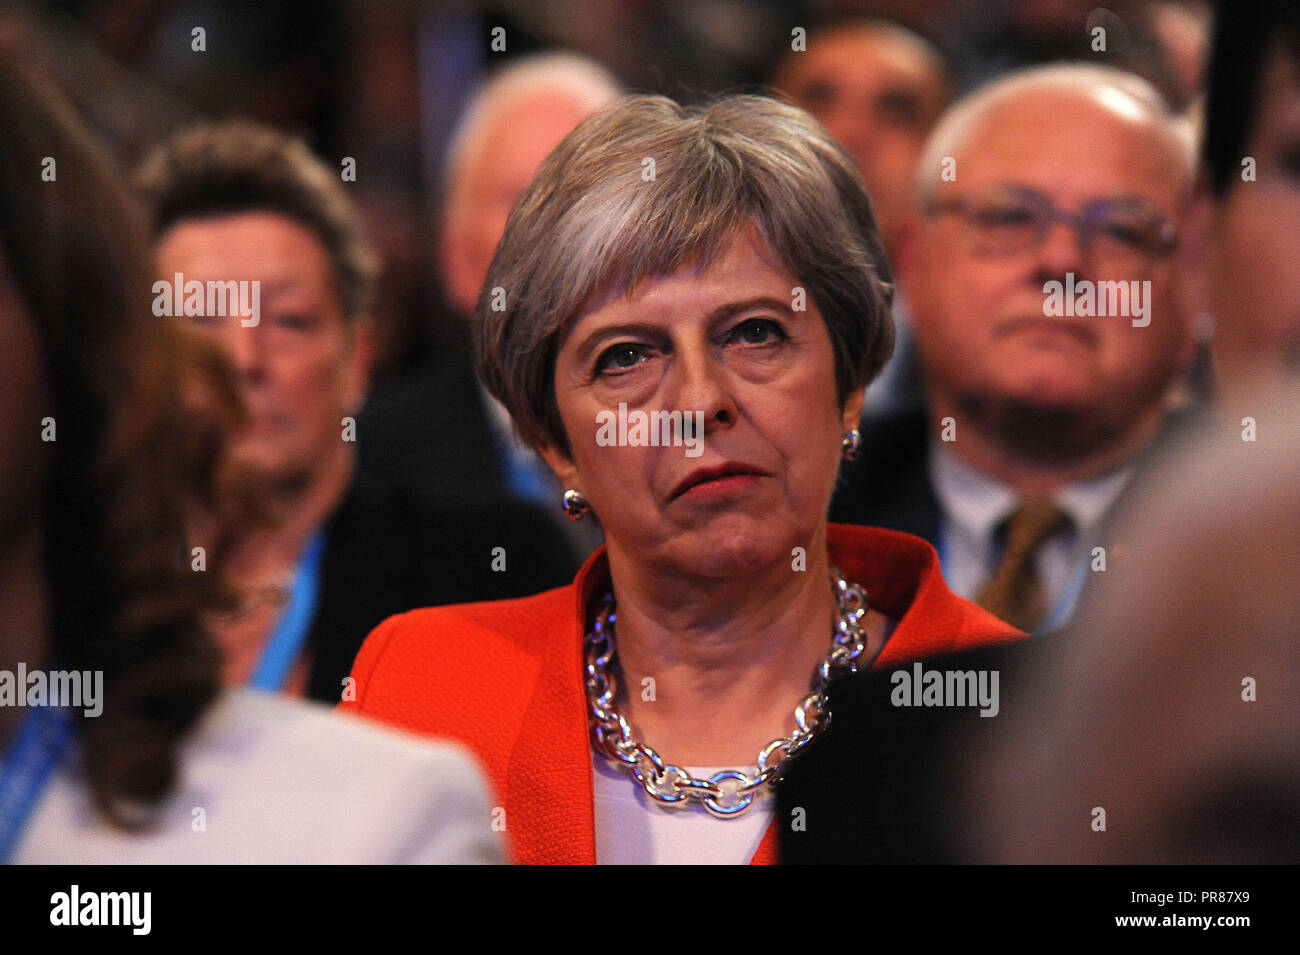 Birmingham, UK. 30th September, 2018.  Theresa May MP, Prime Minister and Leader of the Conservative Party, listening to opening speeches to conference on the first session of the first day of the Conservative Party annual conference at the ICC.  Kevin Hayes/Alamy Live News Stock Photo